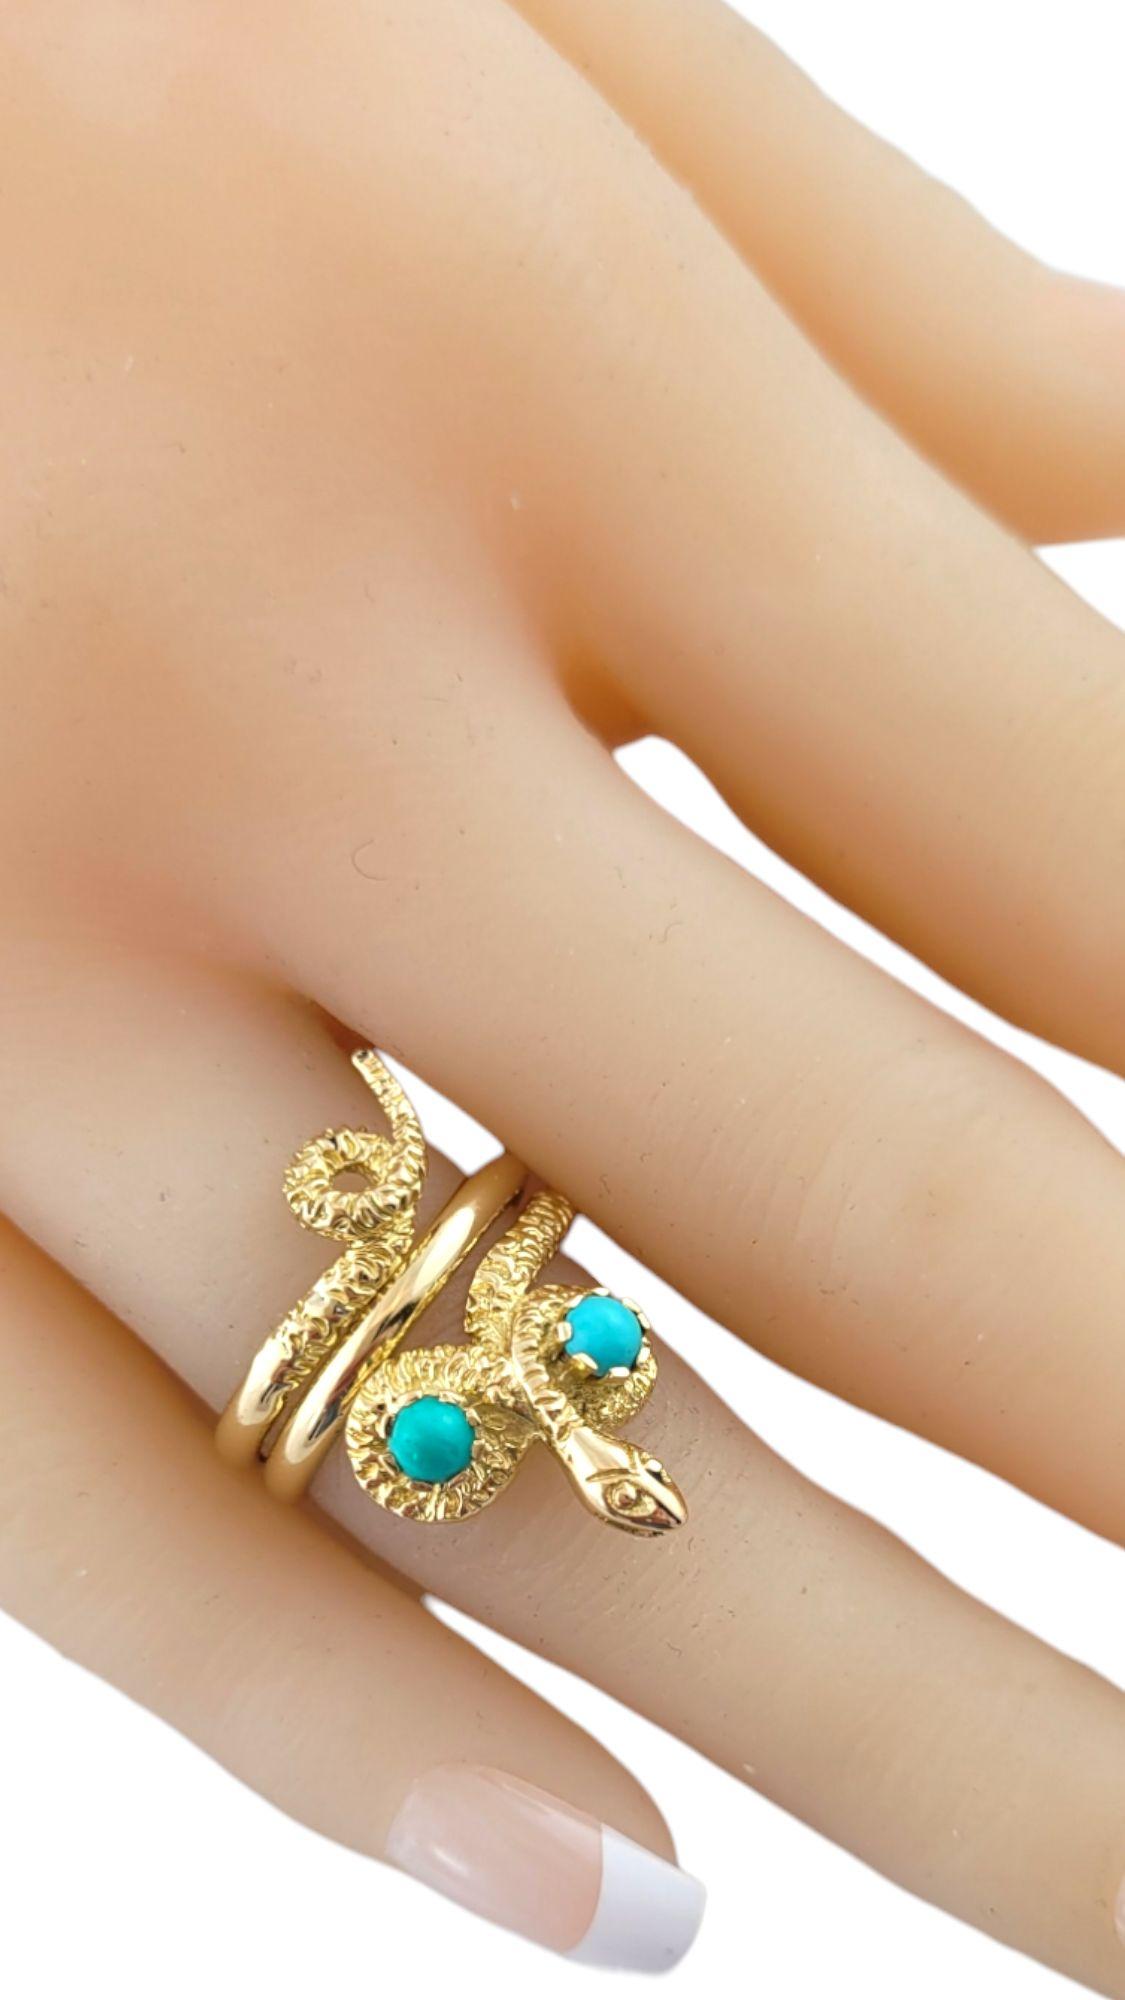 18 Karat Yellow Gold and Turquoise Snake Ring Size 7.5 #16616 For Sale 2